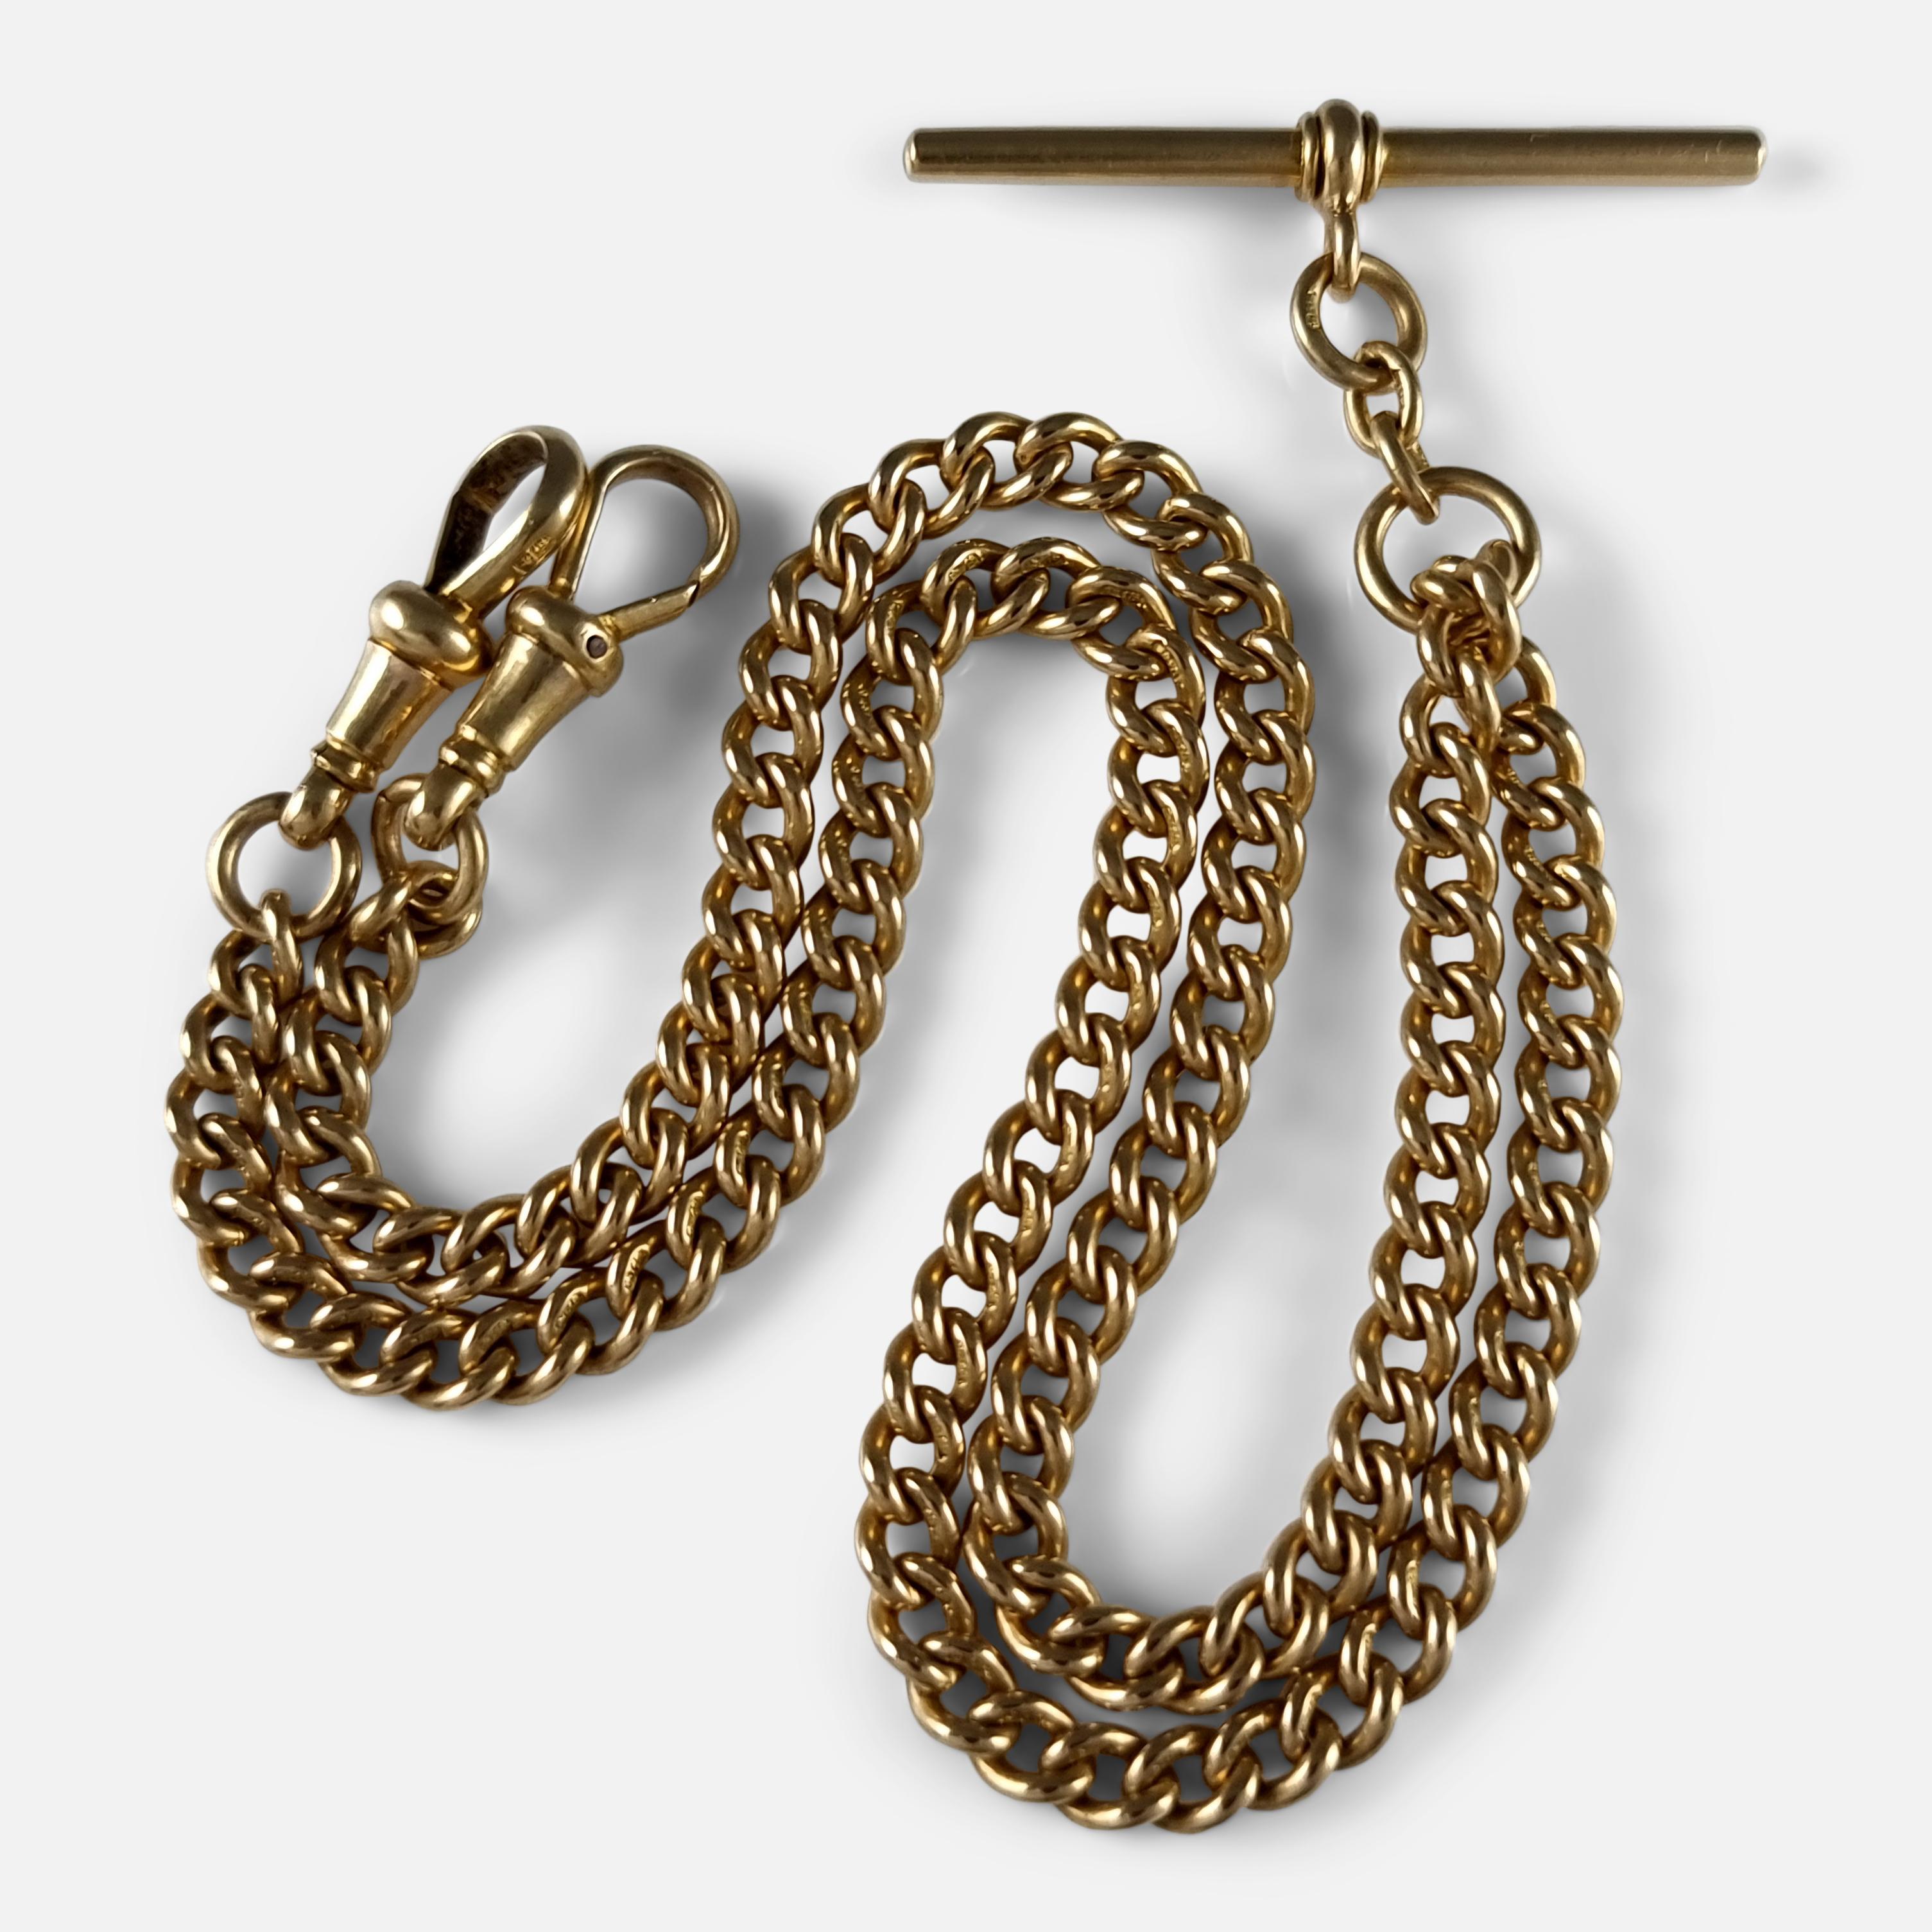 An antique George V 18 carat yellow gold albert watch chain, and T-bar; London, 1919. 

Date: - 1919.

Engraving: - N/A.

Measurement: - The watch chain measures approximately 15 5/8 inches (39.7cm) end to end. The chain links are 0.5cm